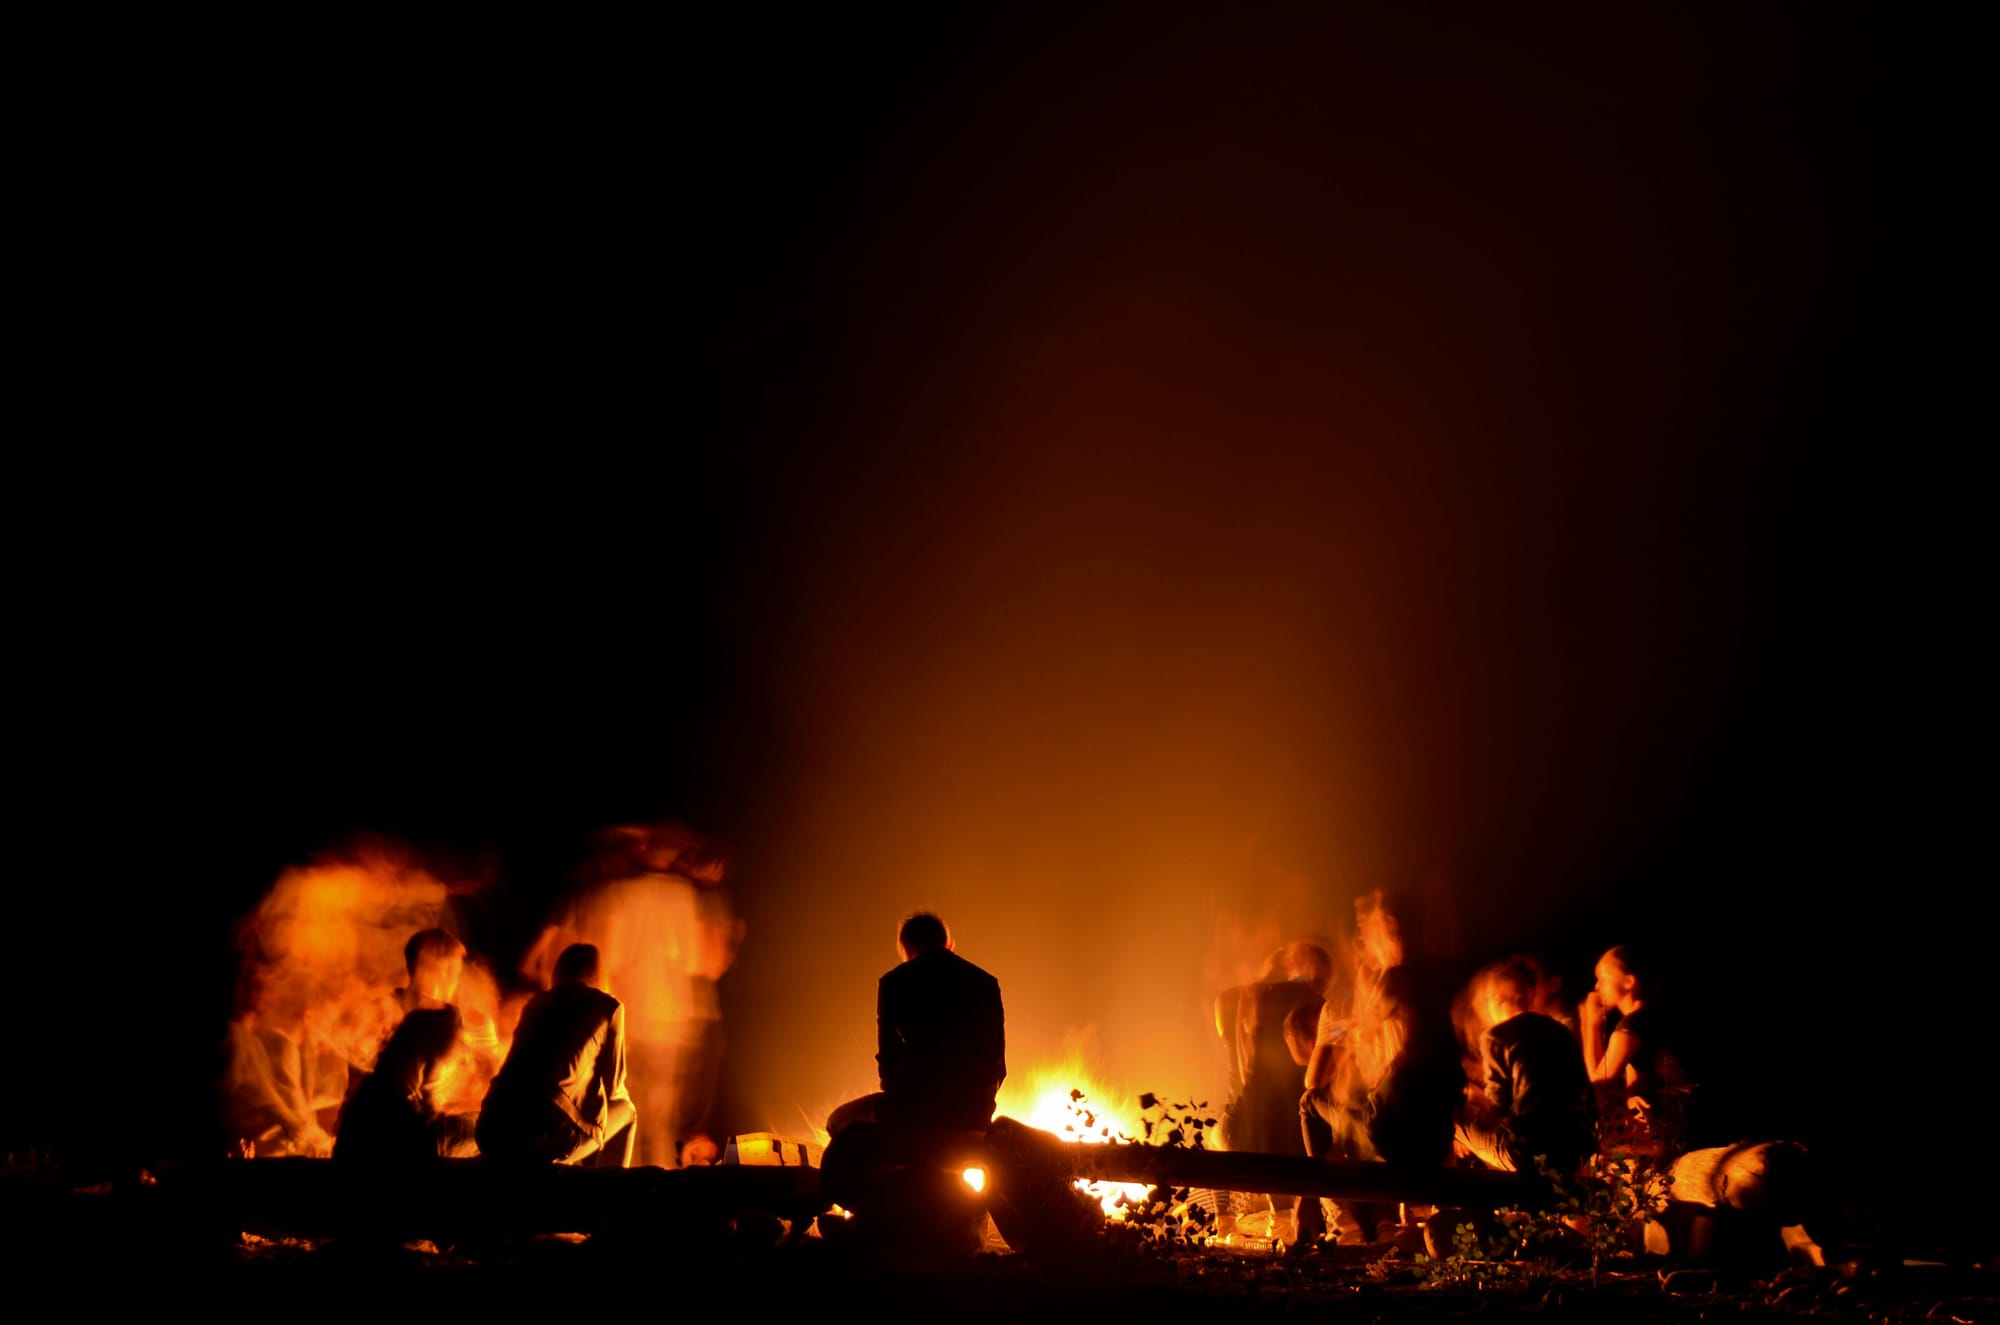 Group of people around a campfire at night